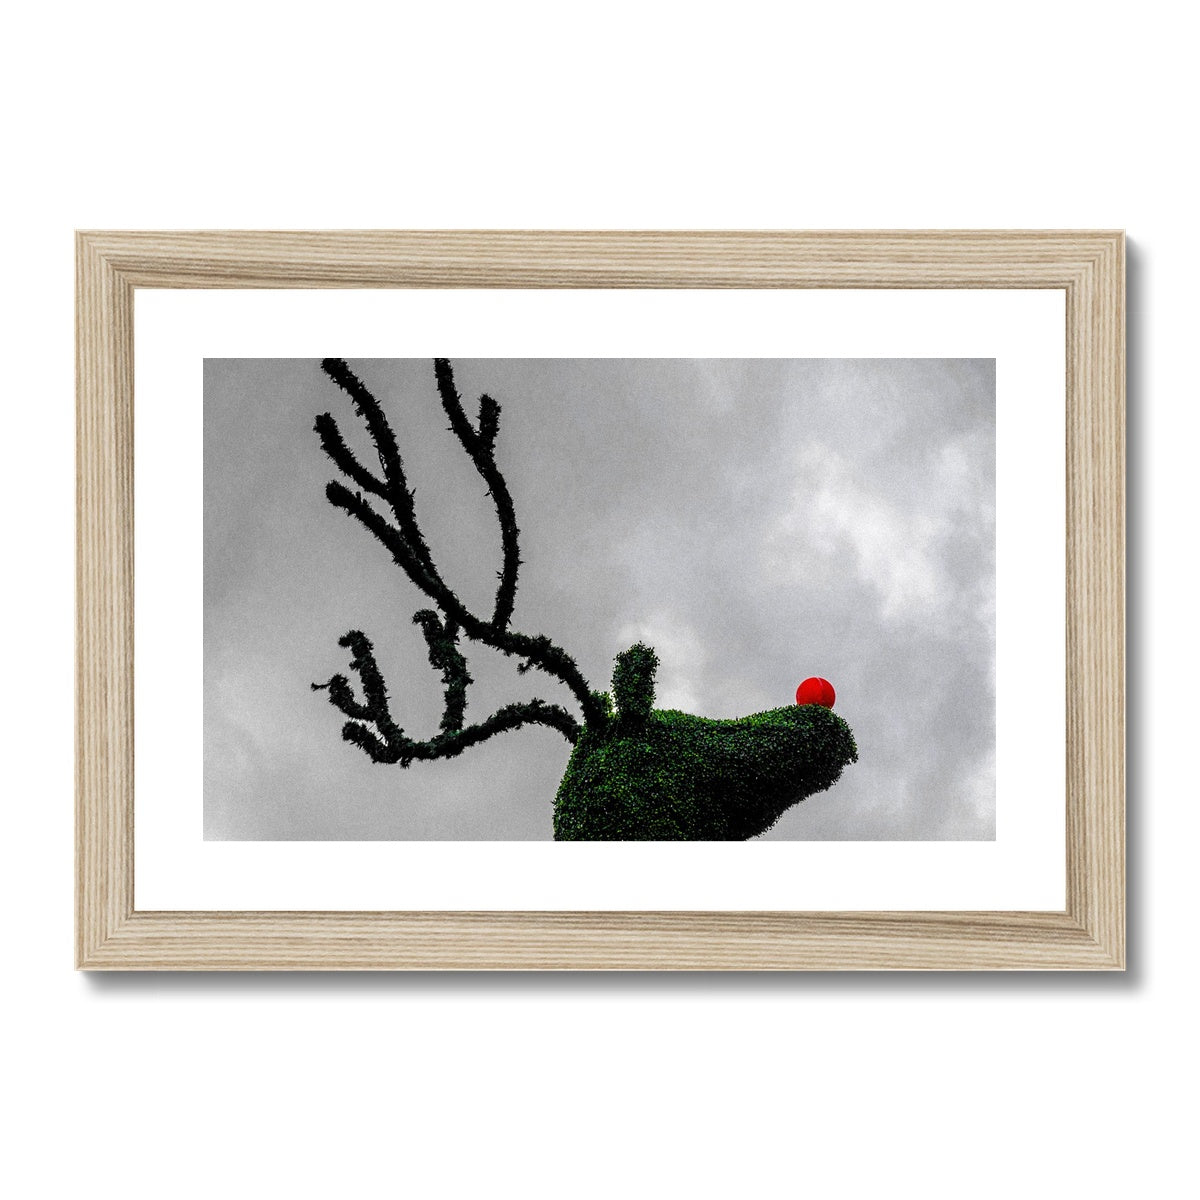 Topiary Christmas reindeer with red nose, Covent Garden, London, UK. Framed & Mounted Print